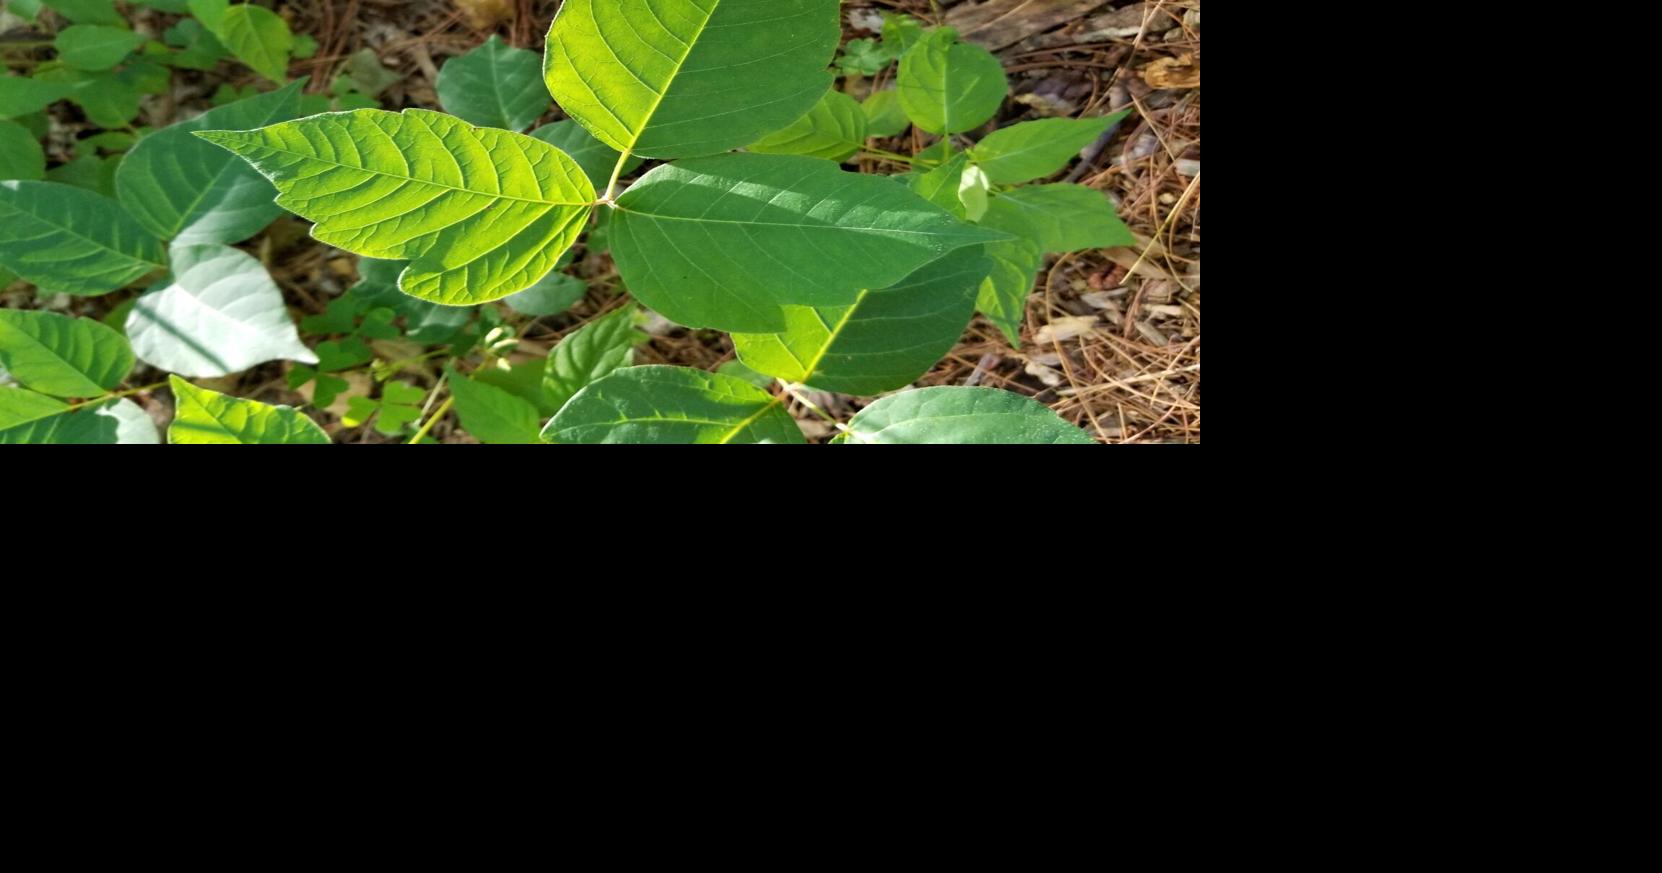 How to identify poison ivy in your backyard or in the woods